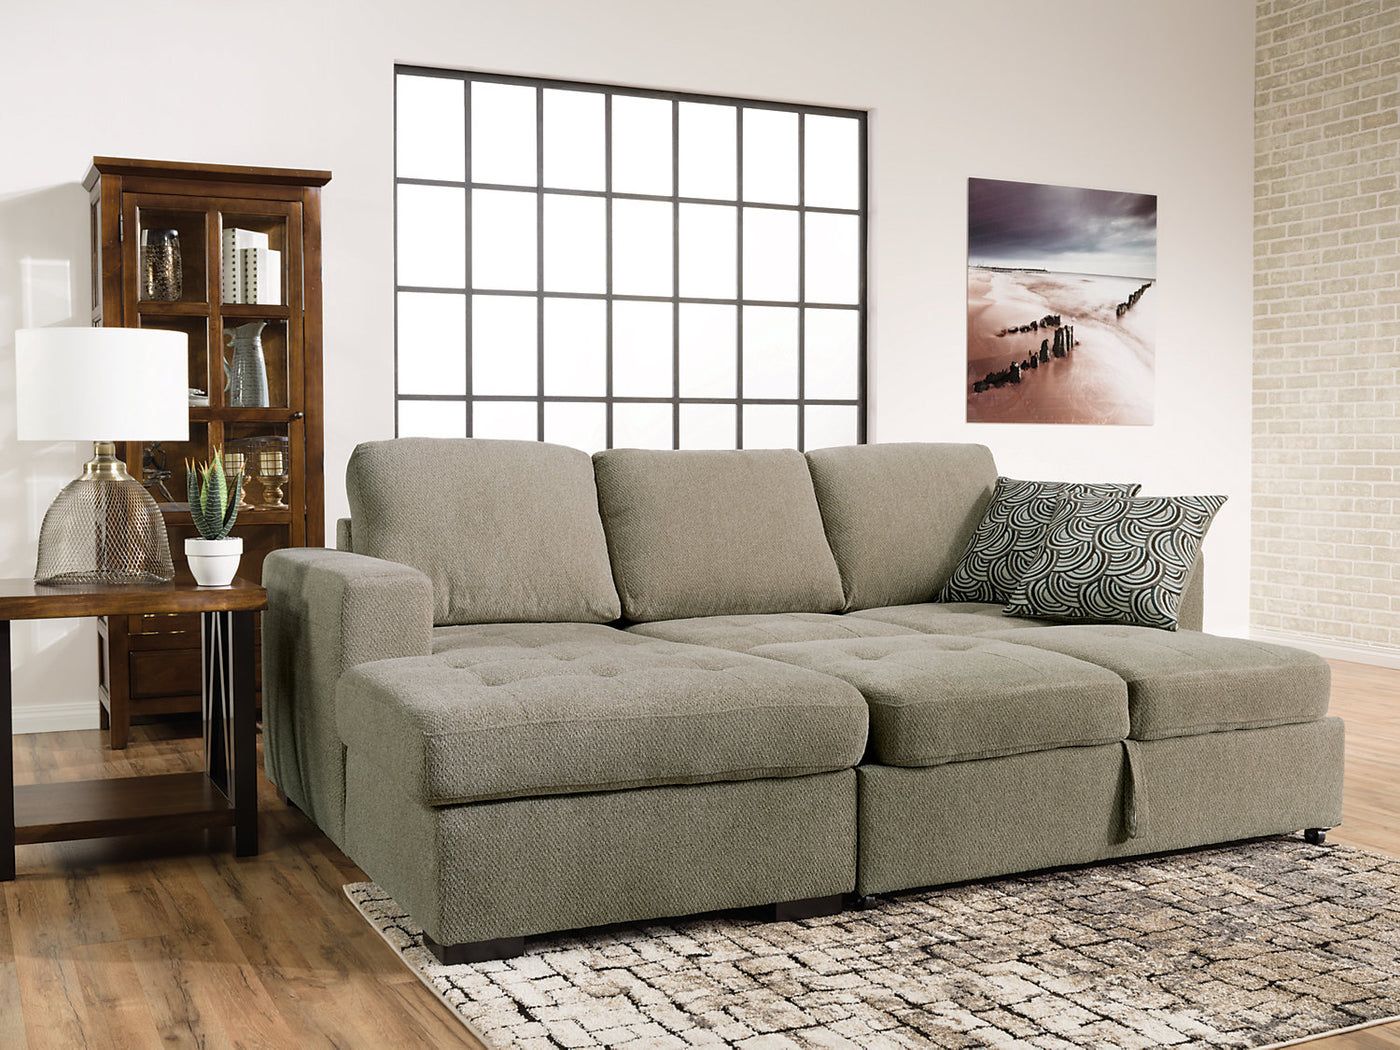 Izzy 2 Piece Chenille Left Facing Sleeper Sectional – Platinum | The Brick Intended For Left Or Right Facing Sleeper Sectionals (View 12 of 21)